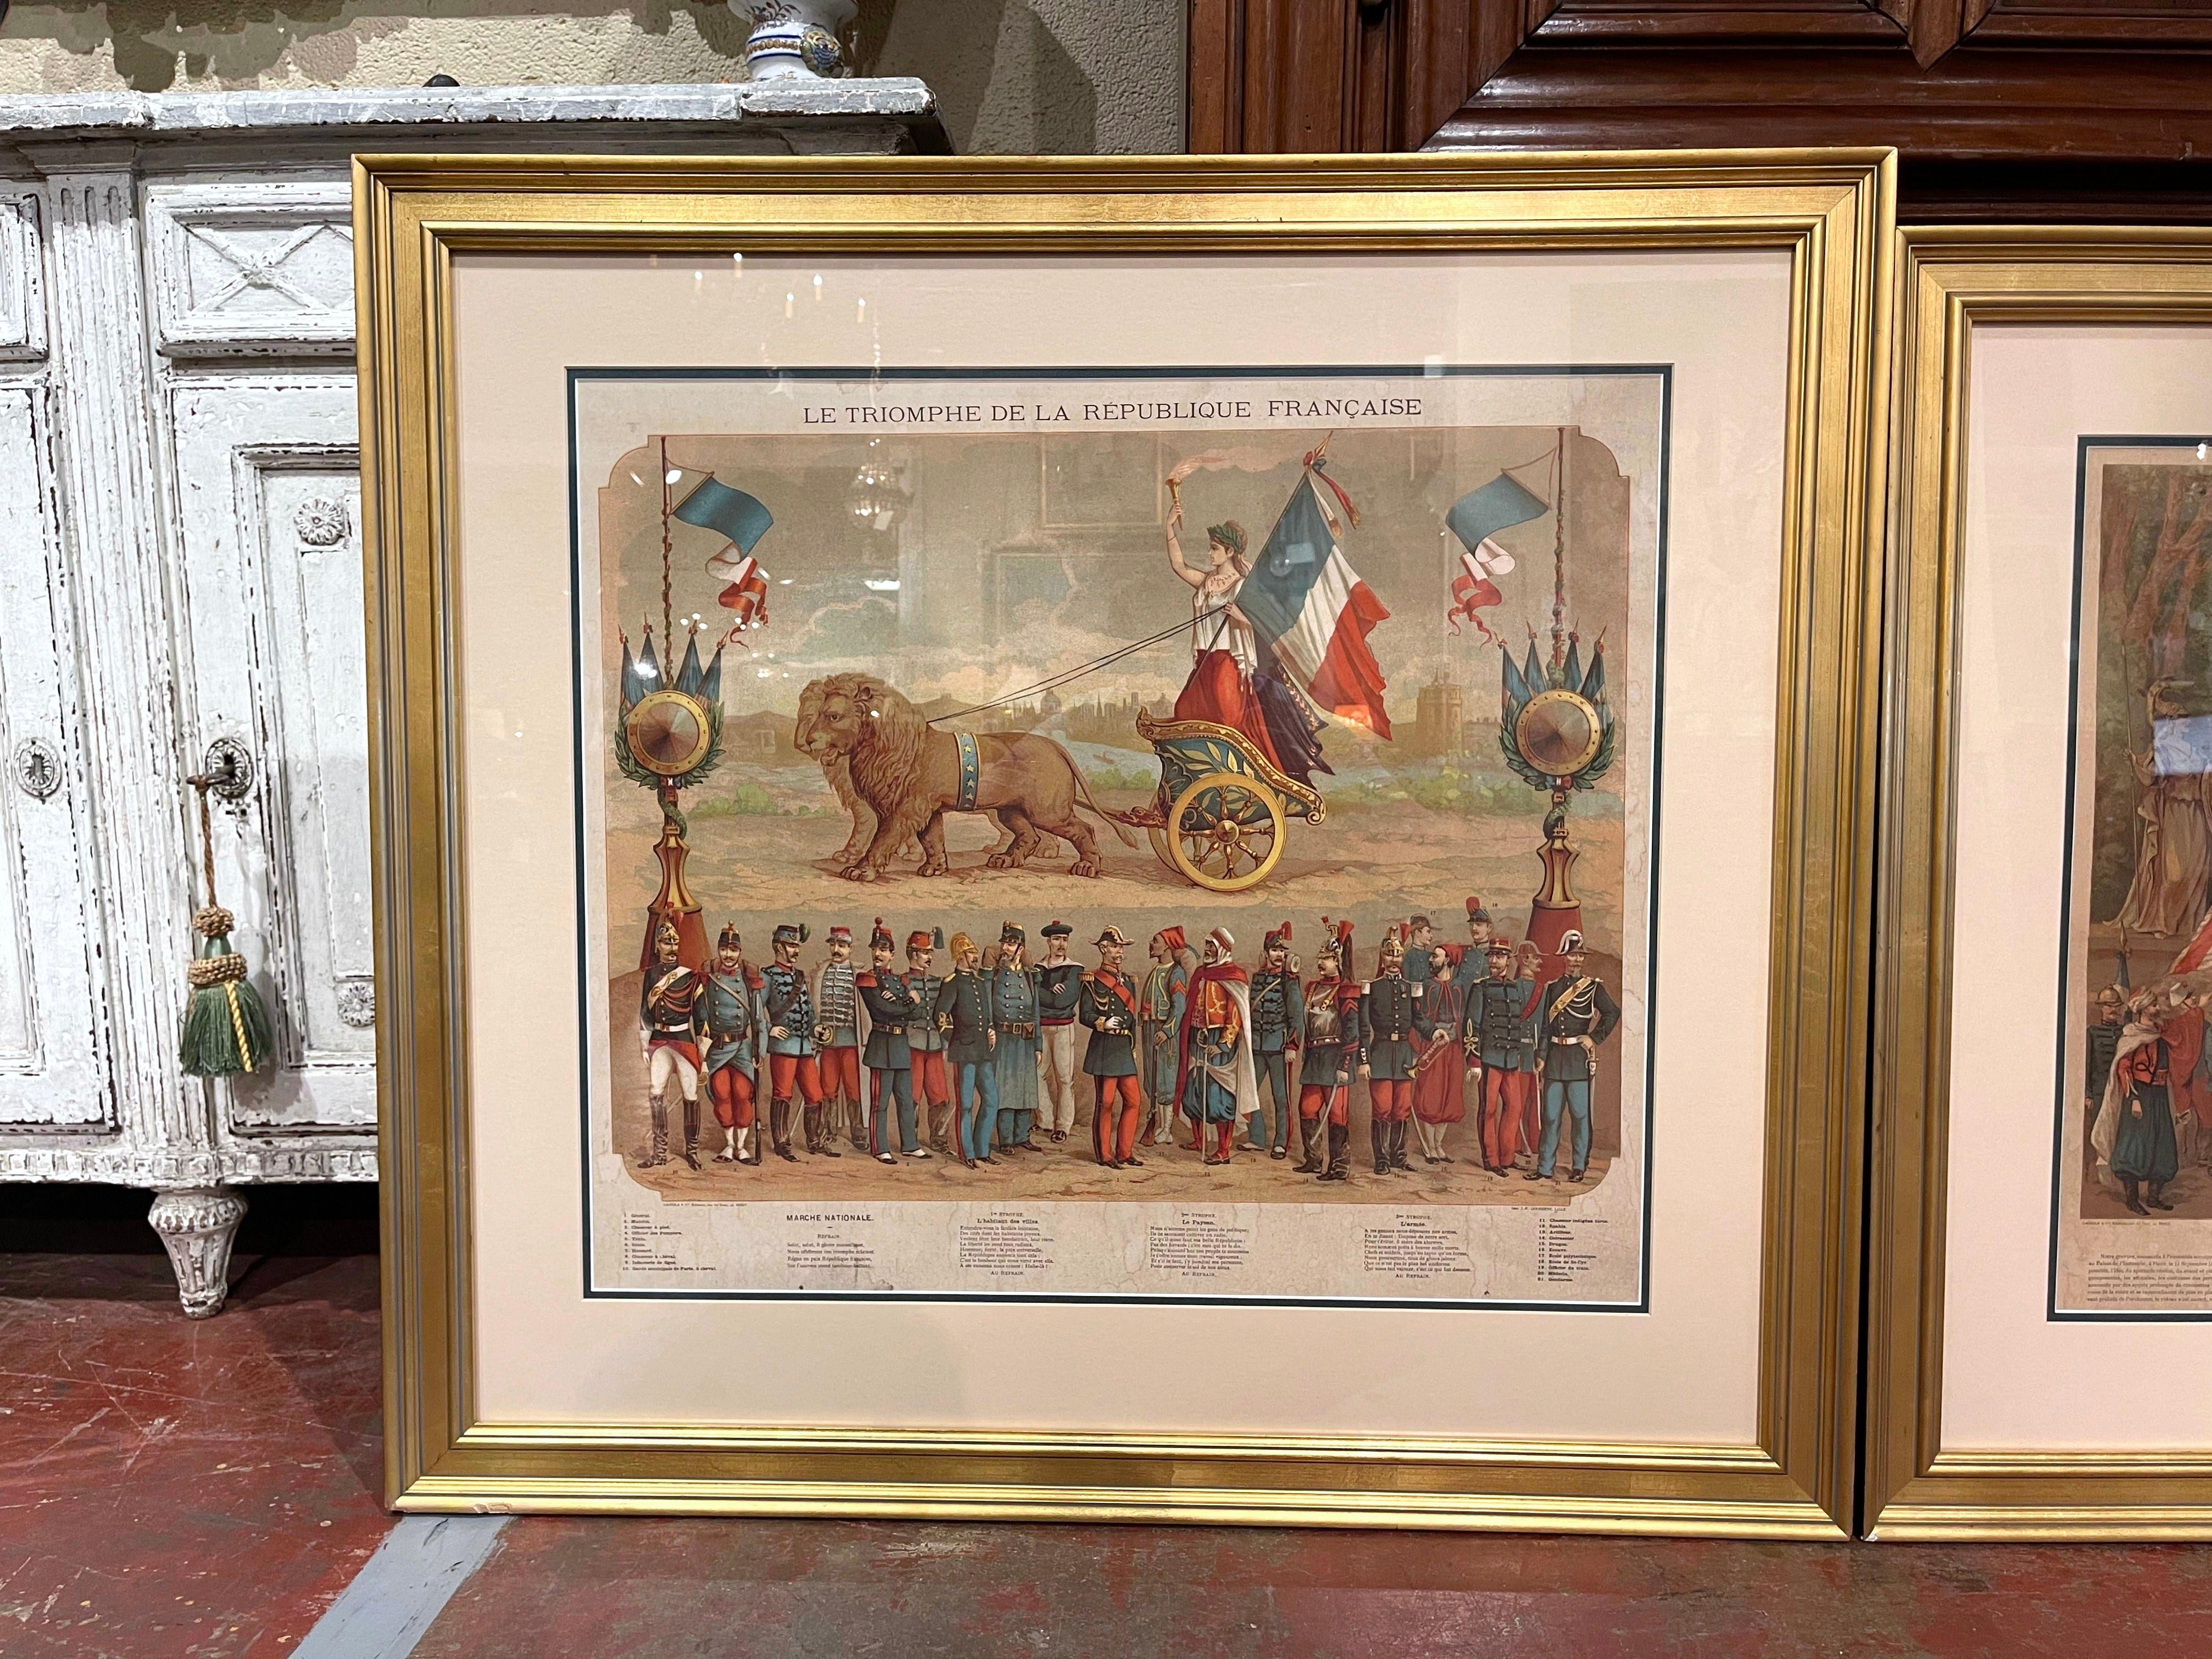 Decorate a game room, a den or an office with these two large framed antique prints. Printed in France circa 1900, each colorful artwork is set in a carved gilt wood frame and protected with glass; each depicts the souvenir and triumph of the